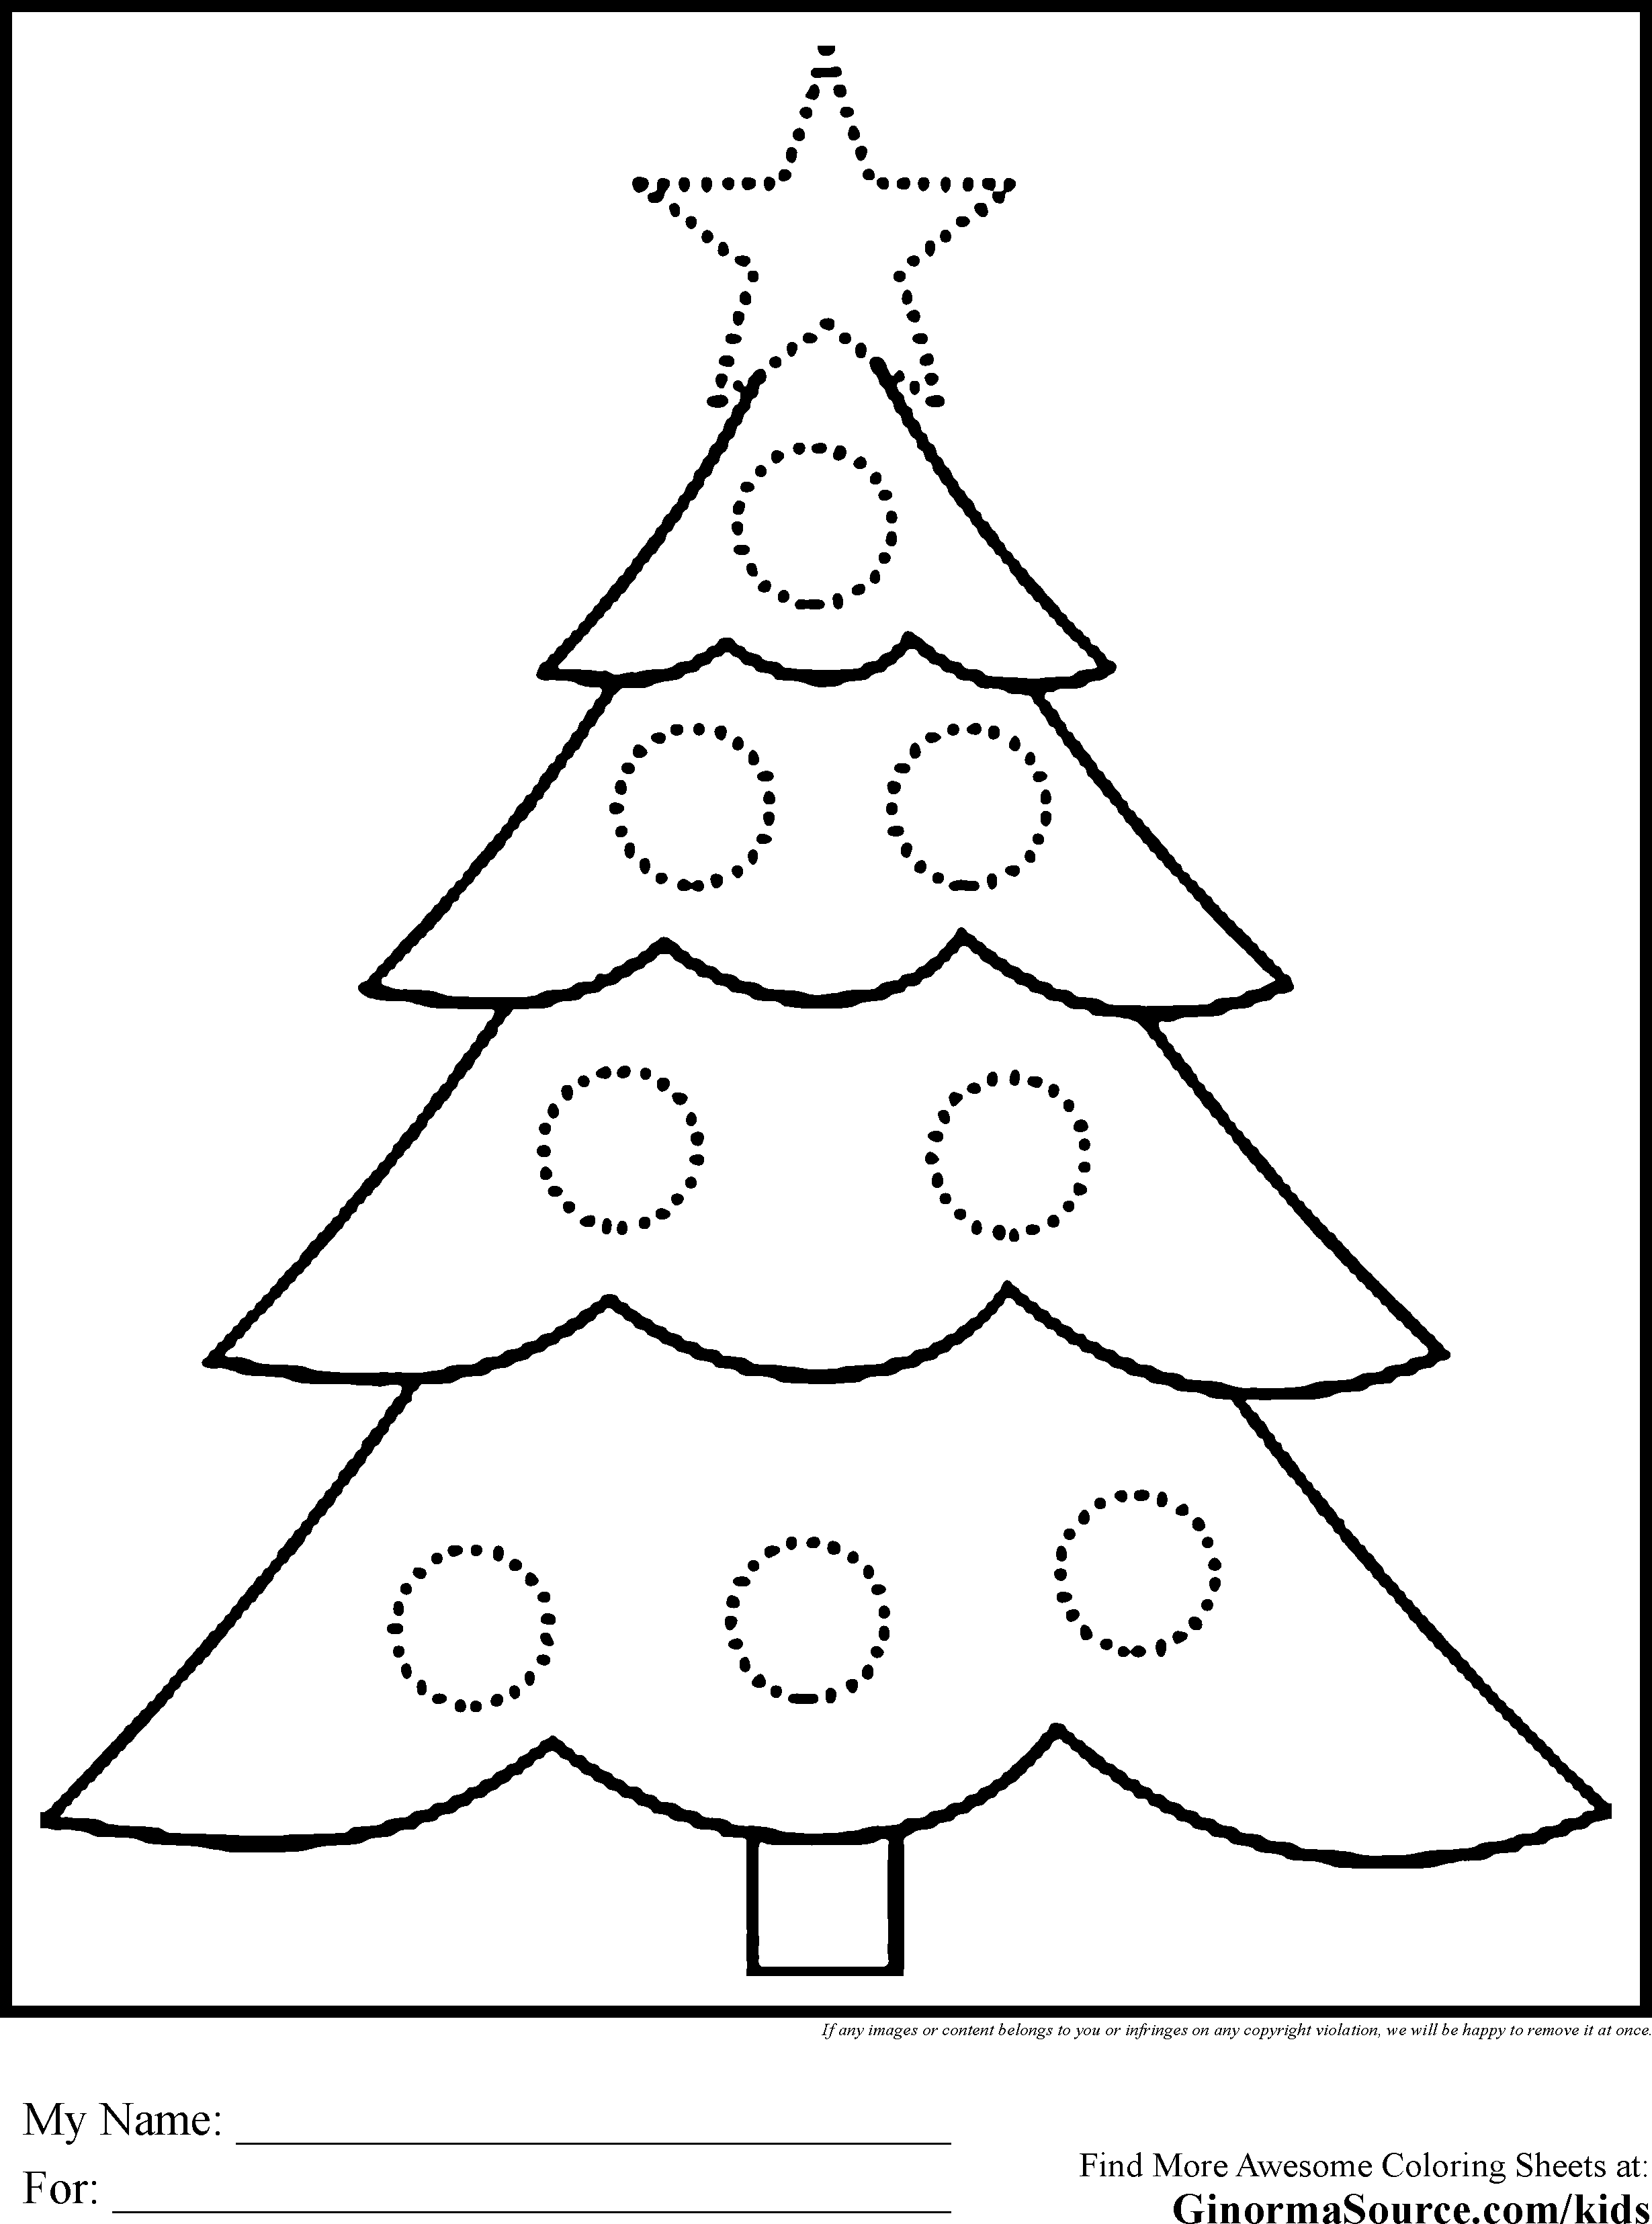 Christmas tree coloring pages - coloring book - #33 Free Printable ...